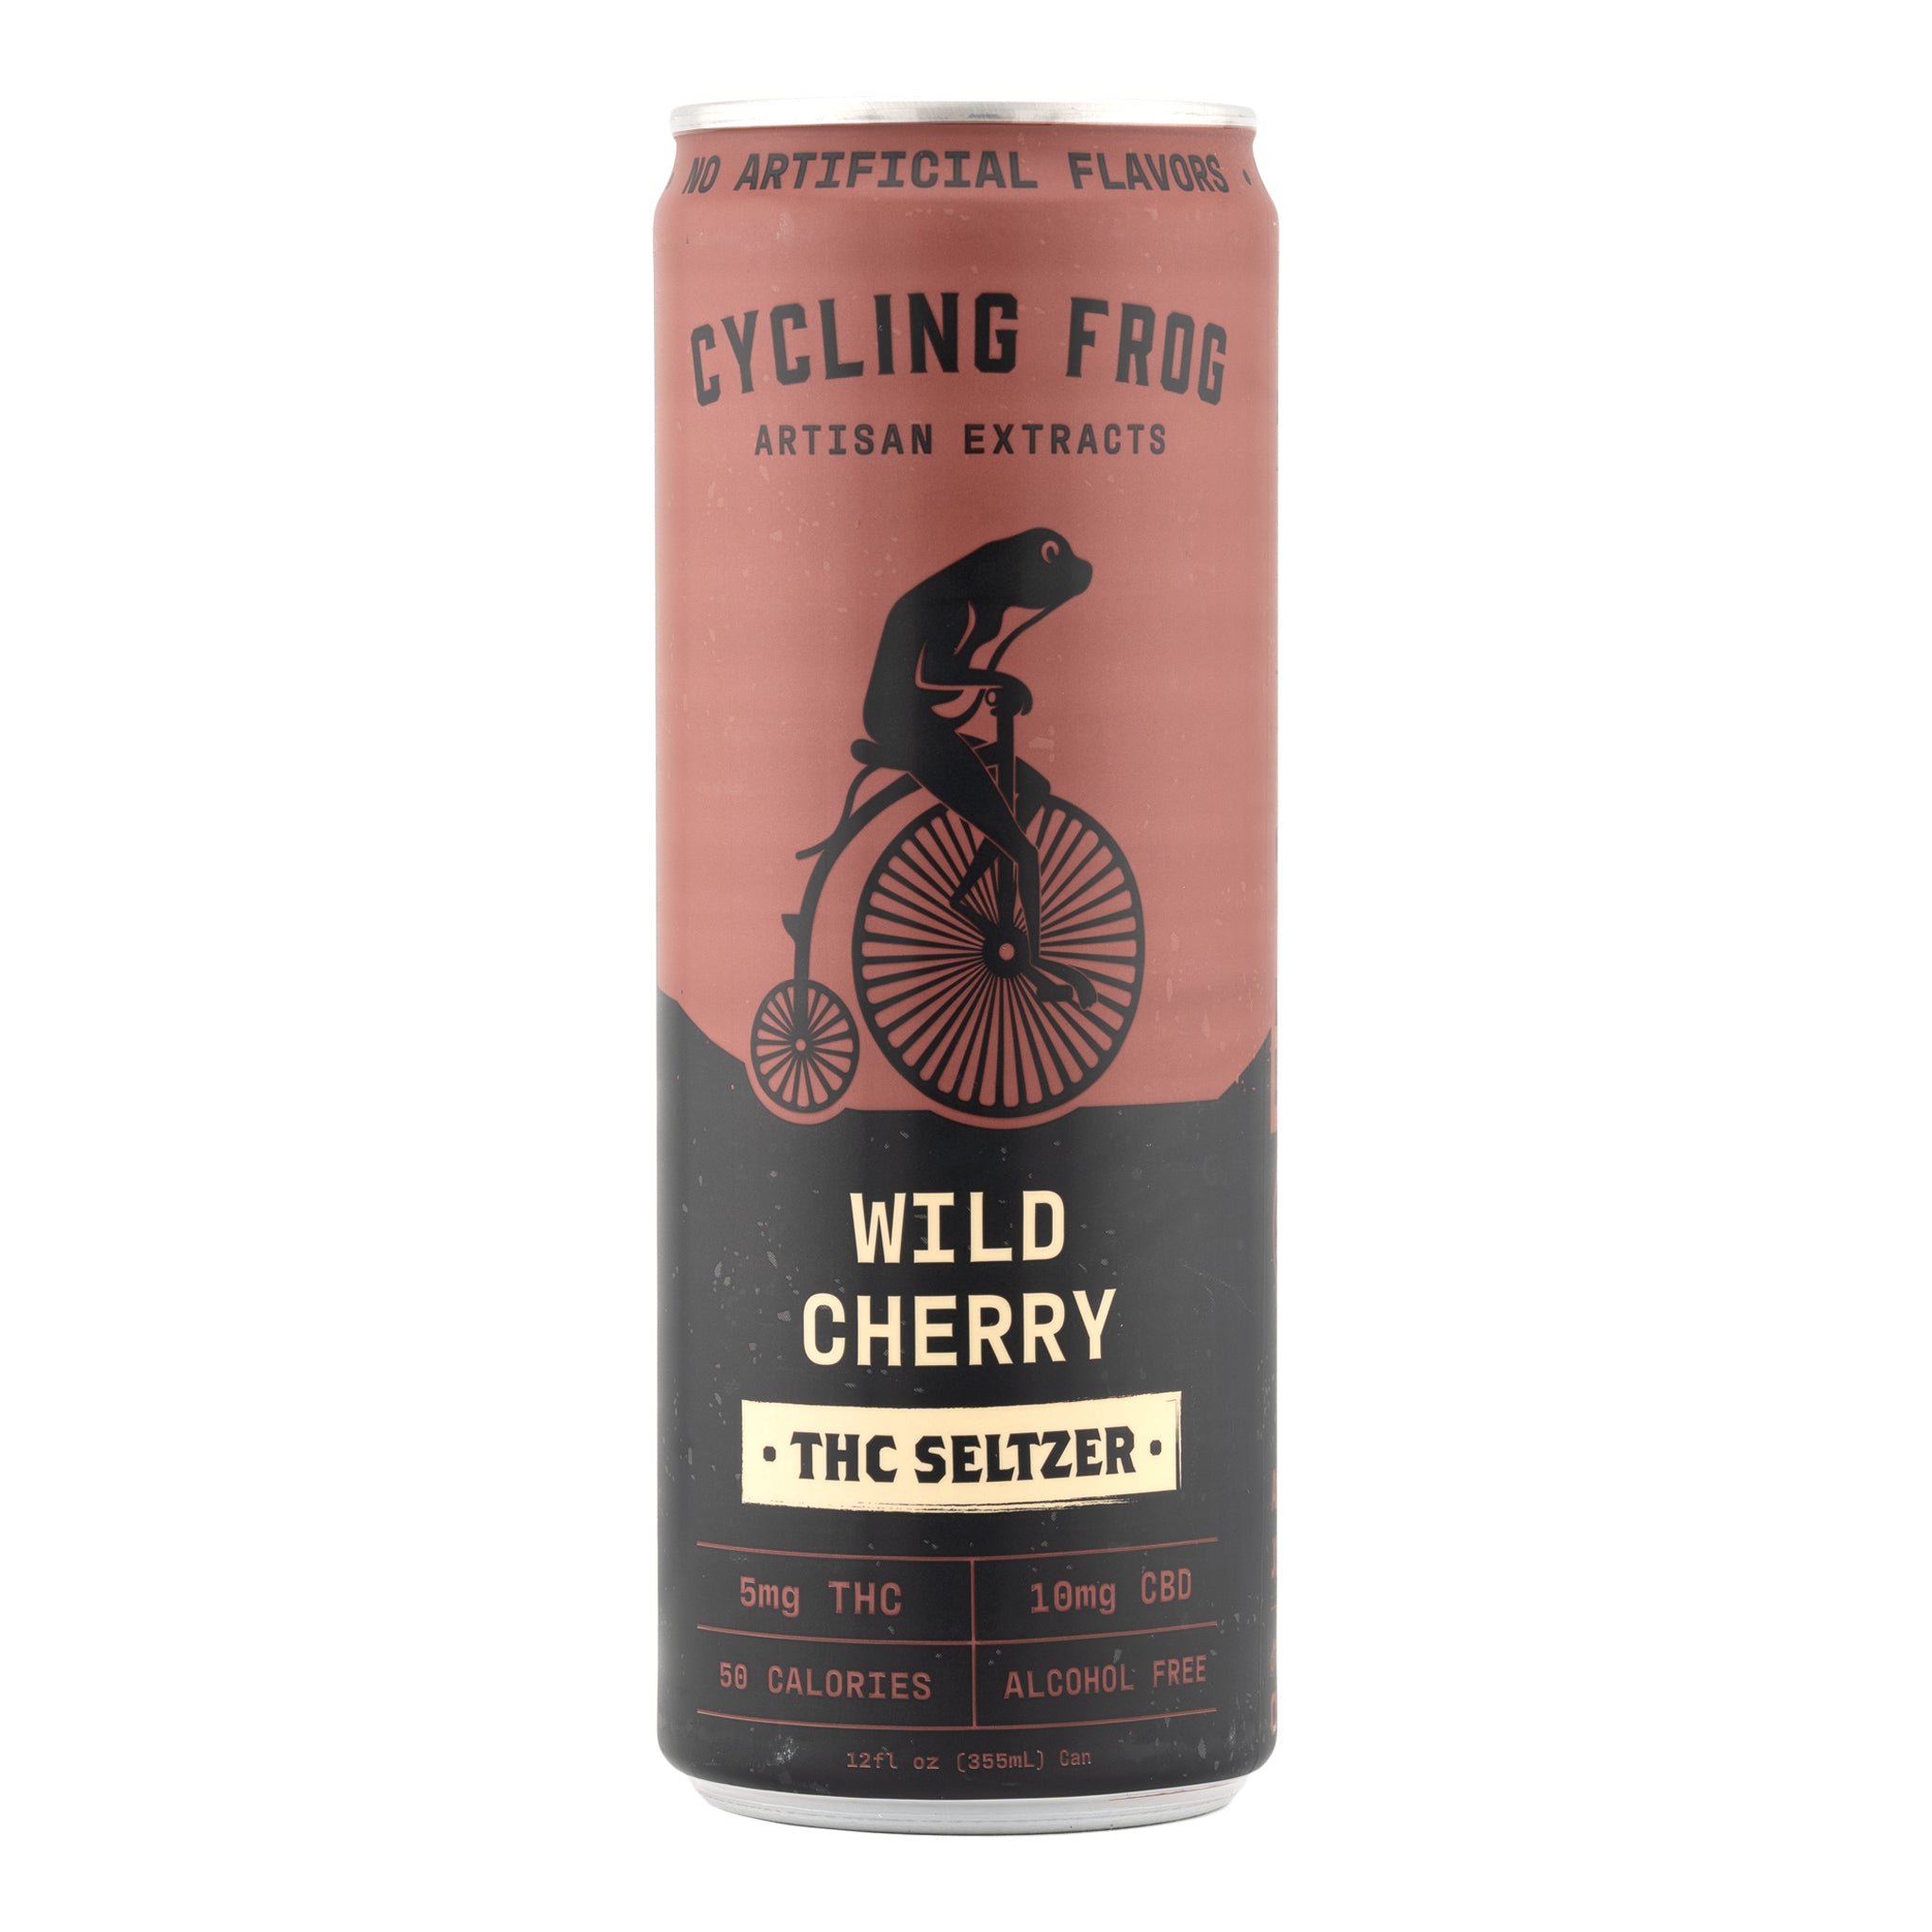 CYCLING FROG Seltzer 5mg THC (4 Flavors)